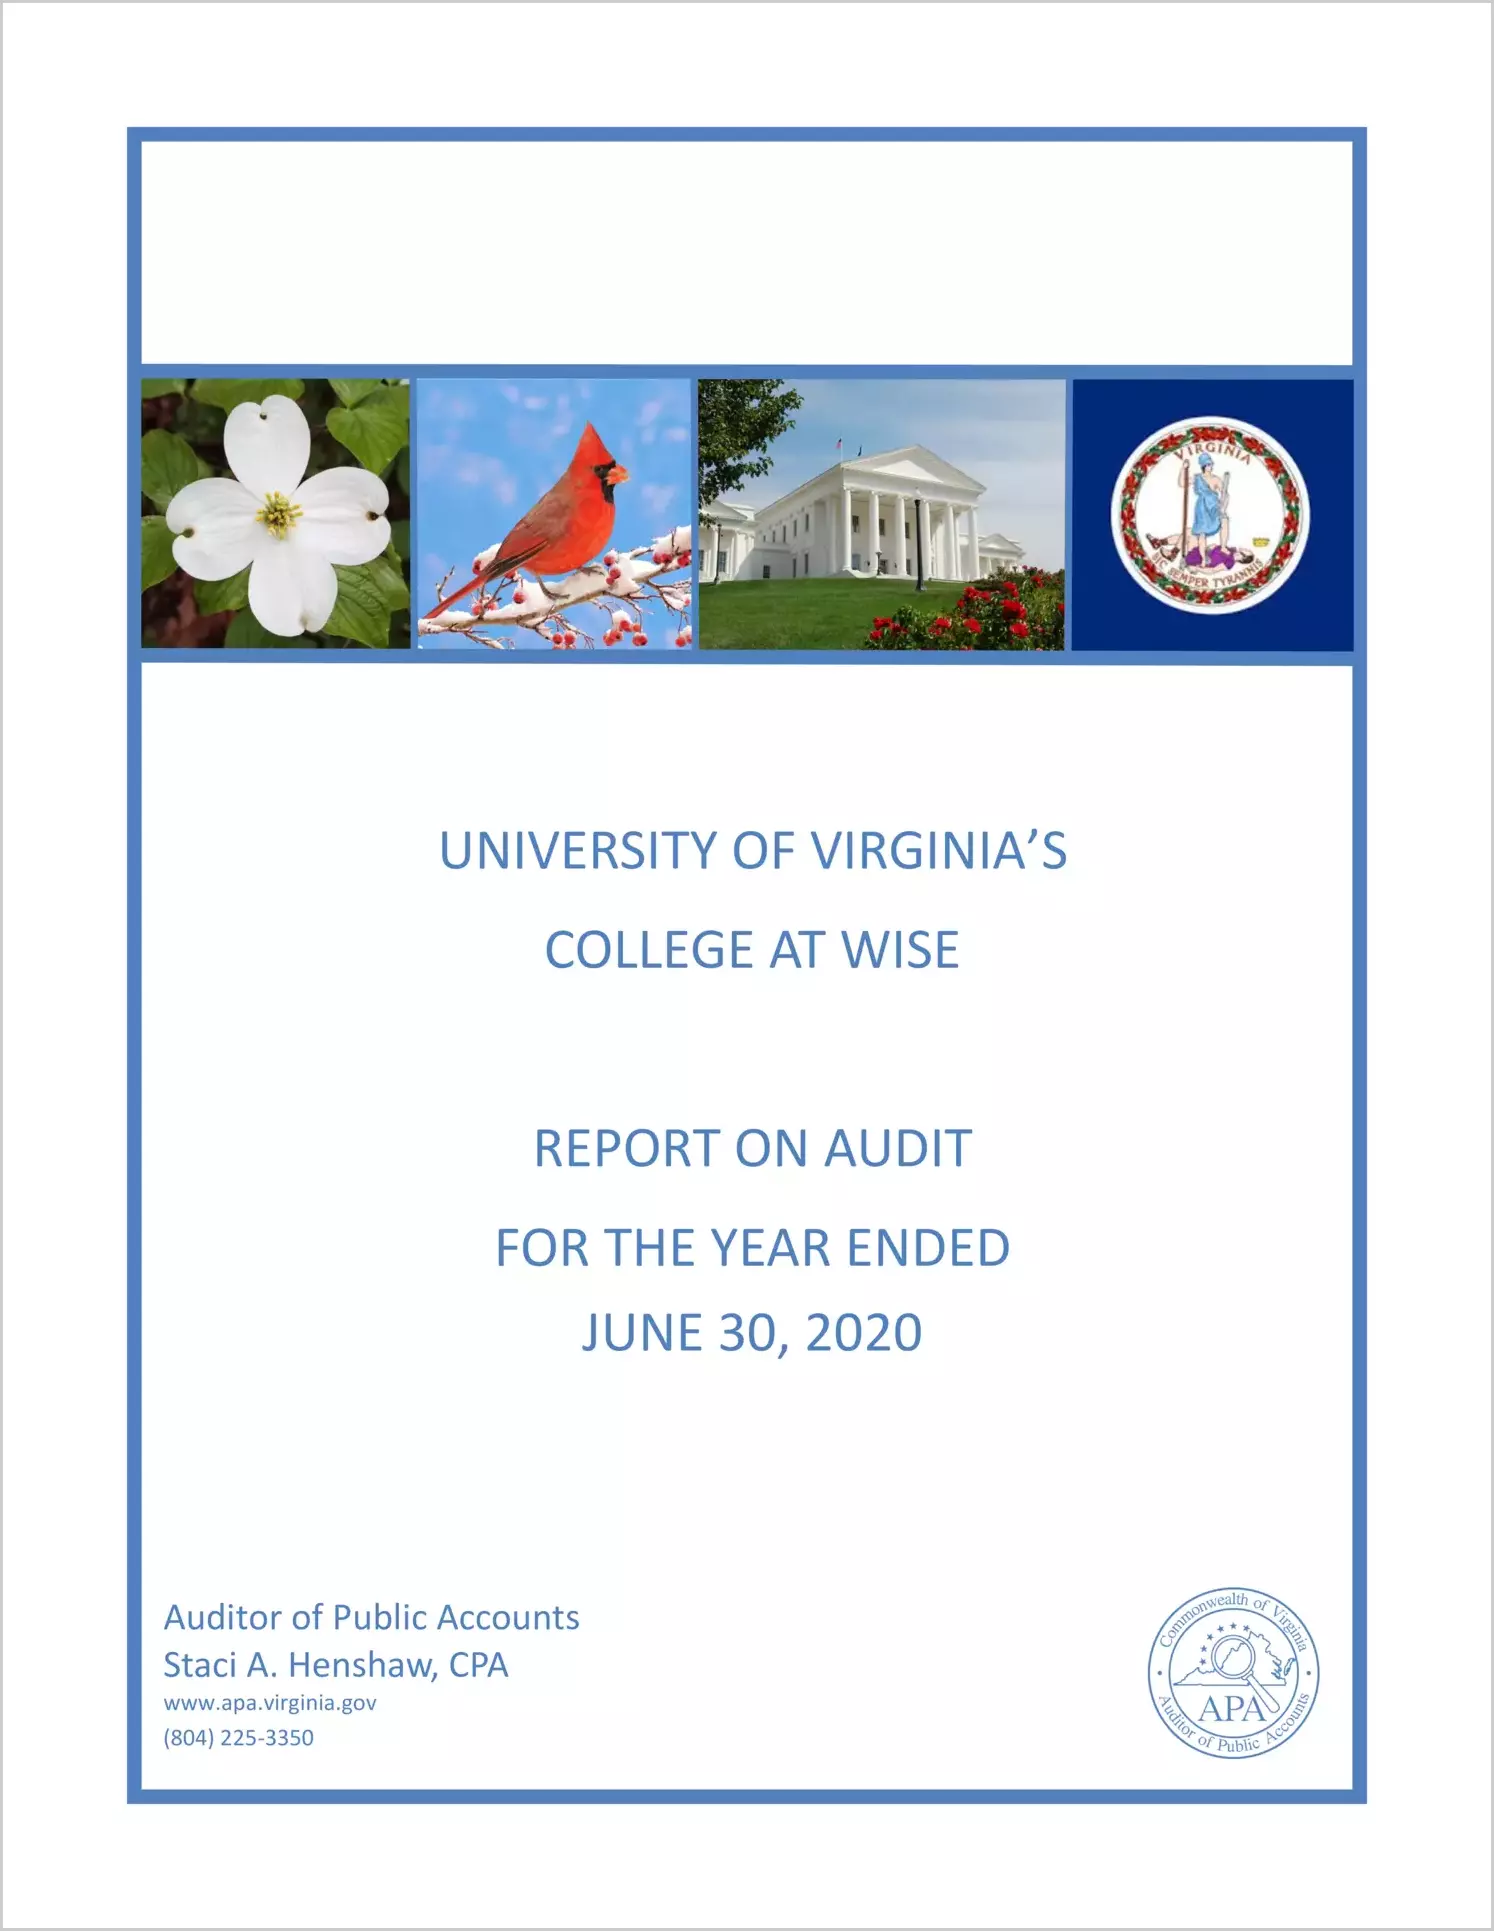 University of Virginia's College at Wise for the year ended June 30, 2020